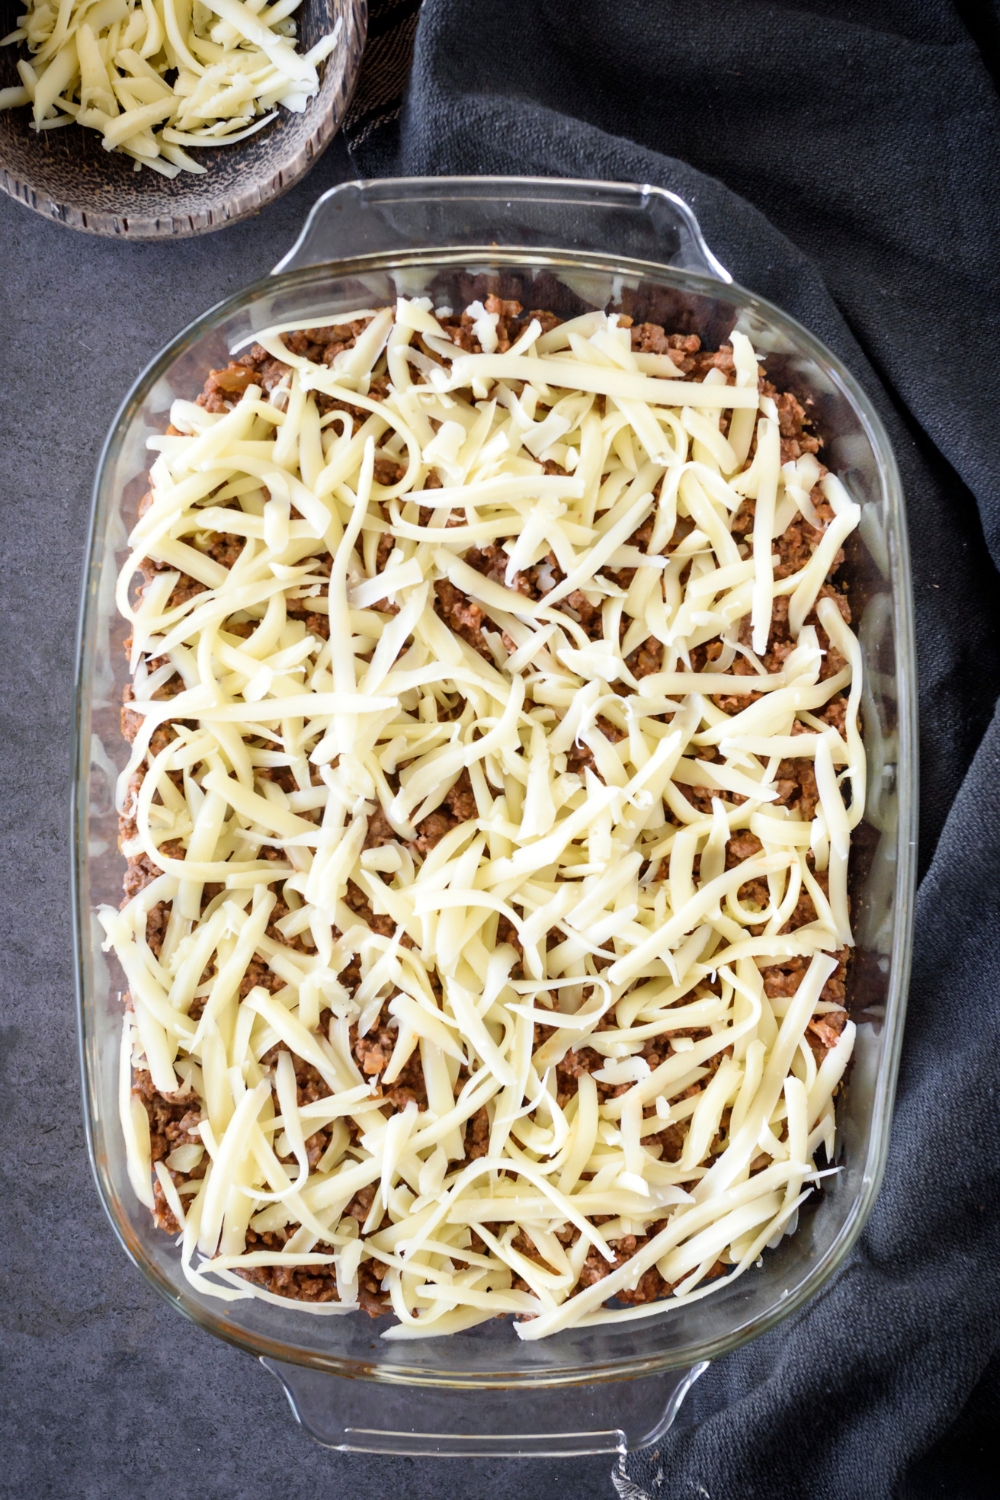 A baking dish filled with cooked and seasoned ground beef covered in shredded cheese.